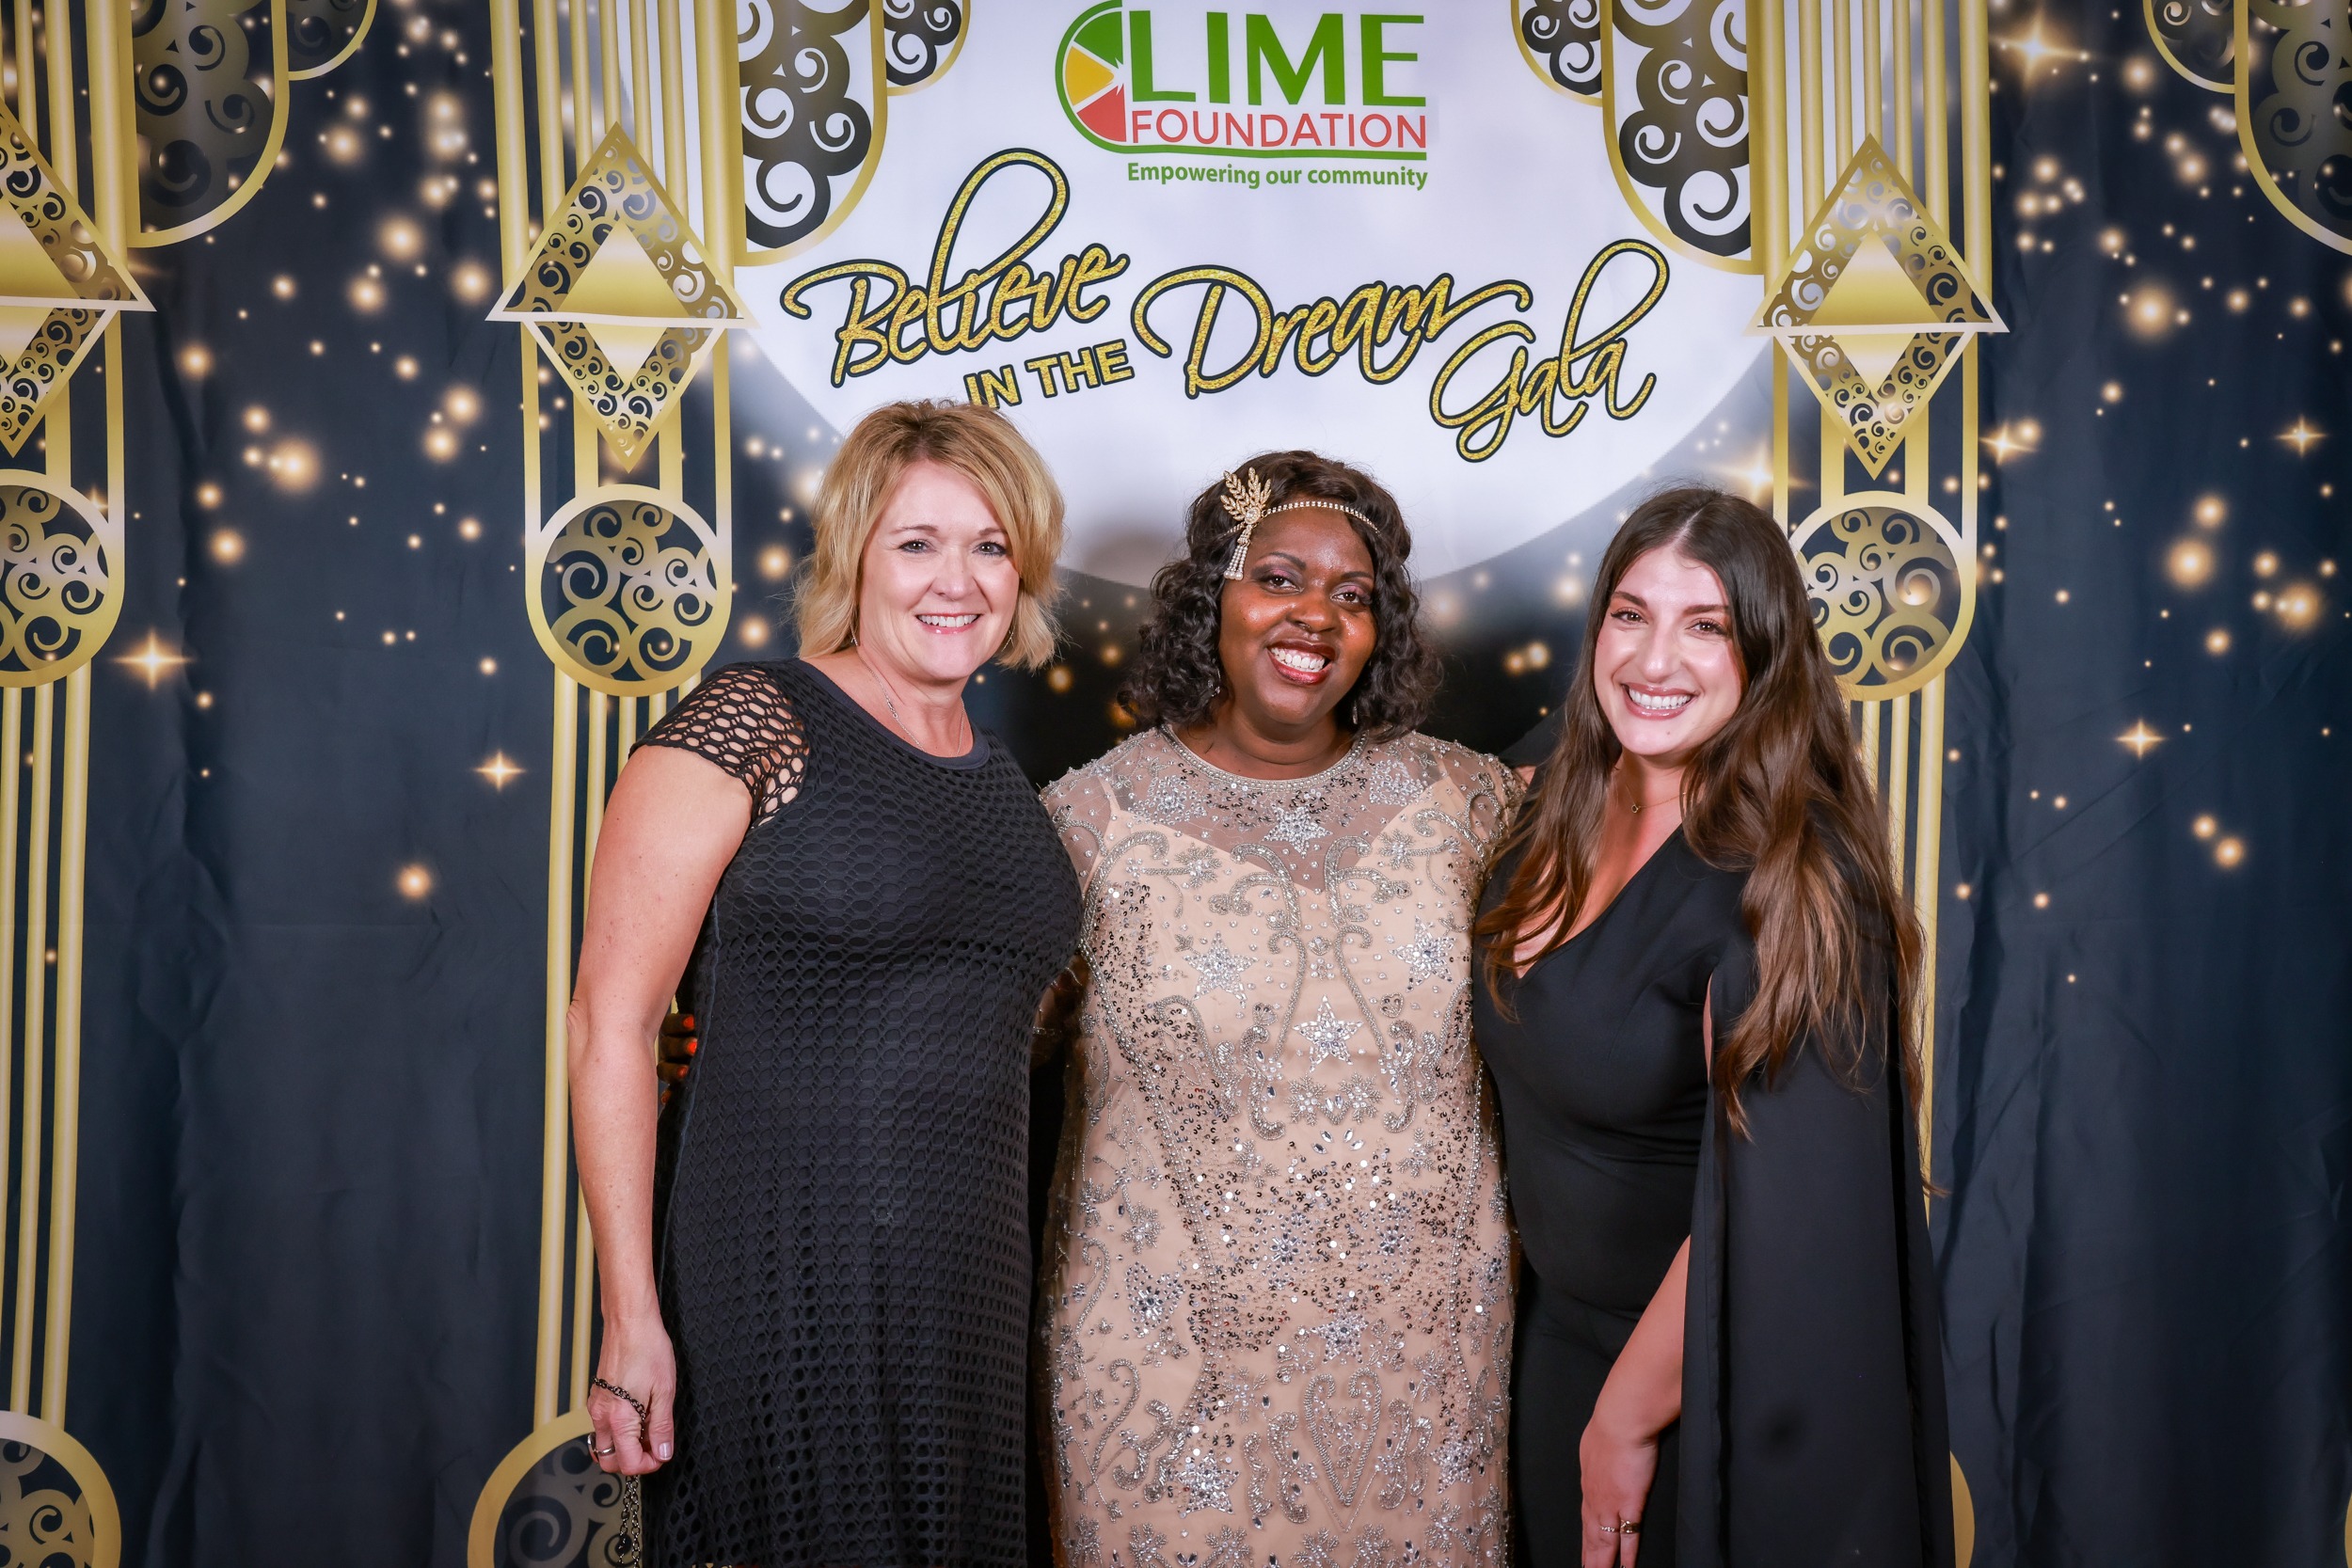 Three women posing for a photo at an event hosted by The LIME Foundation in Santa Rosa.